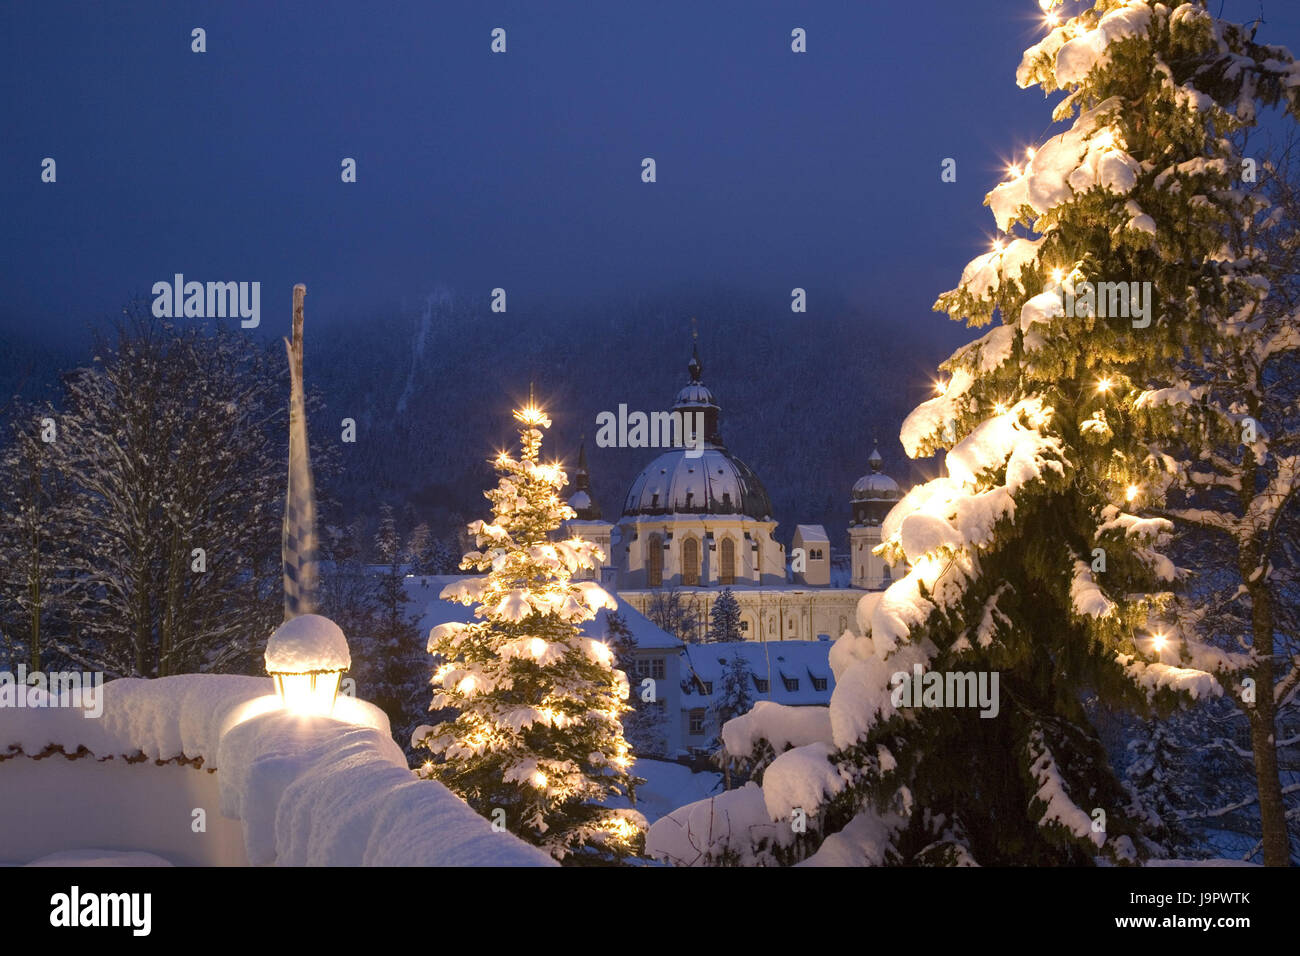 Germany,Bavaria,upper bunting's region,cloister of Ettal,minster,Christmas trees,winter,evening,Upper Bavaria,cloister attachment,Benedictine's abbey,church,domed building,baroque church,structure,architecture,place of interest,destination,tourism,conception,faith,religion,Christianity,snow,snow-covered,lights,yule tide,Christmas, Stock Photo